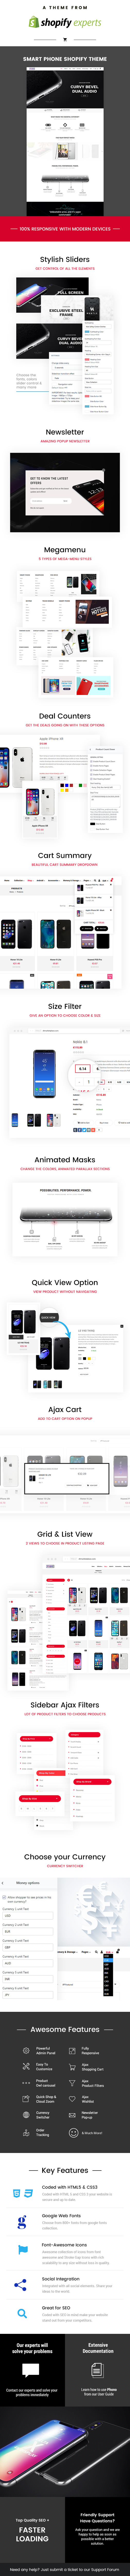 Phono | Online Mobile Store and Phone Shop Shopify Theme - 1